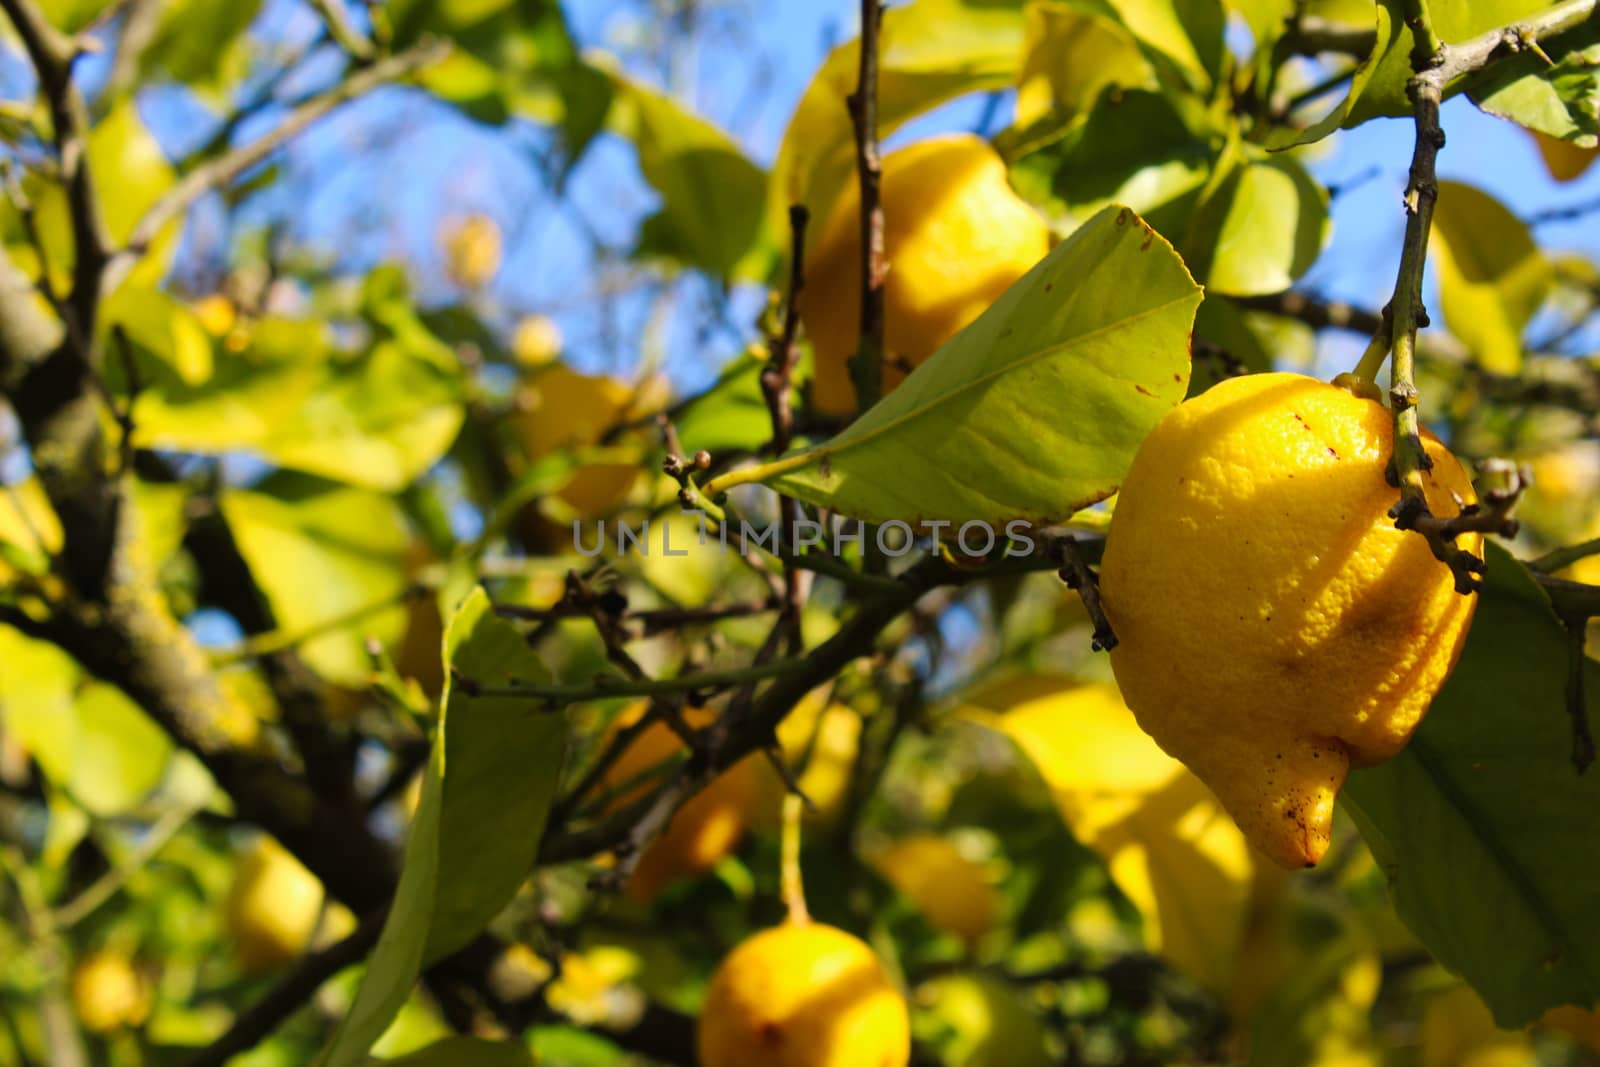 Yellow ripe lemons on a branch with leaves.